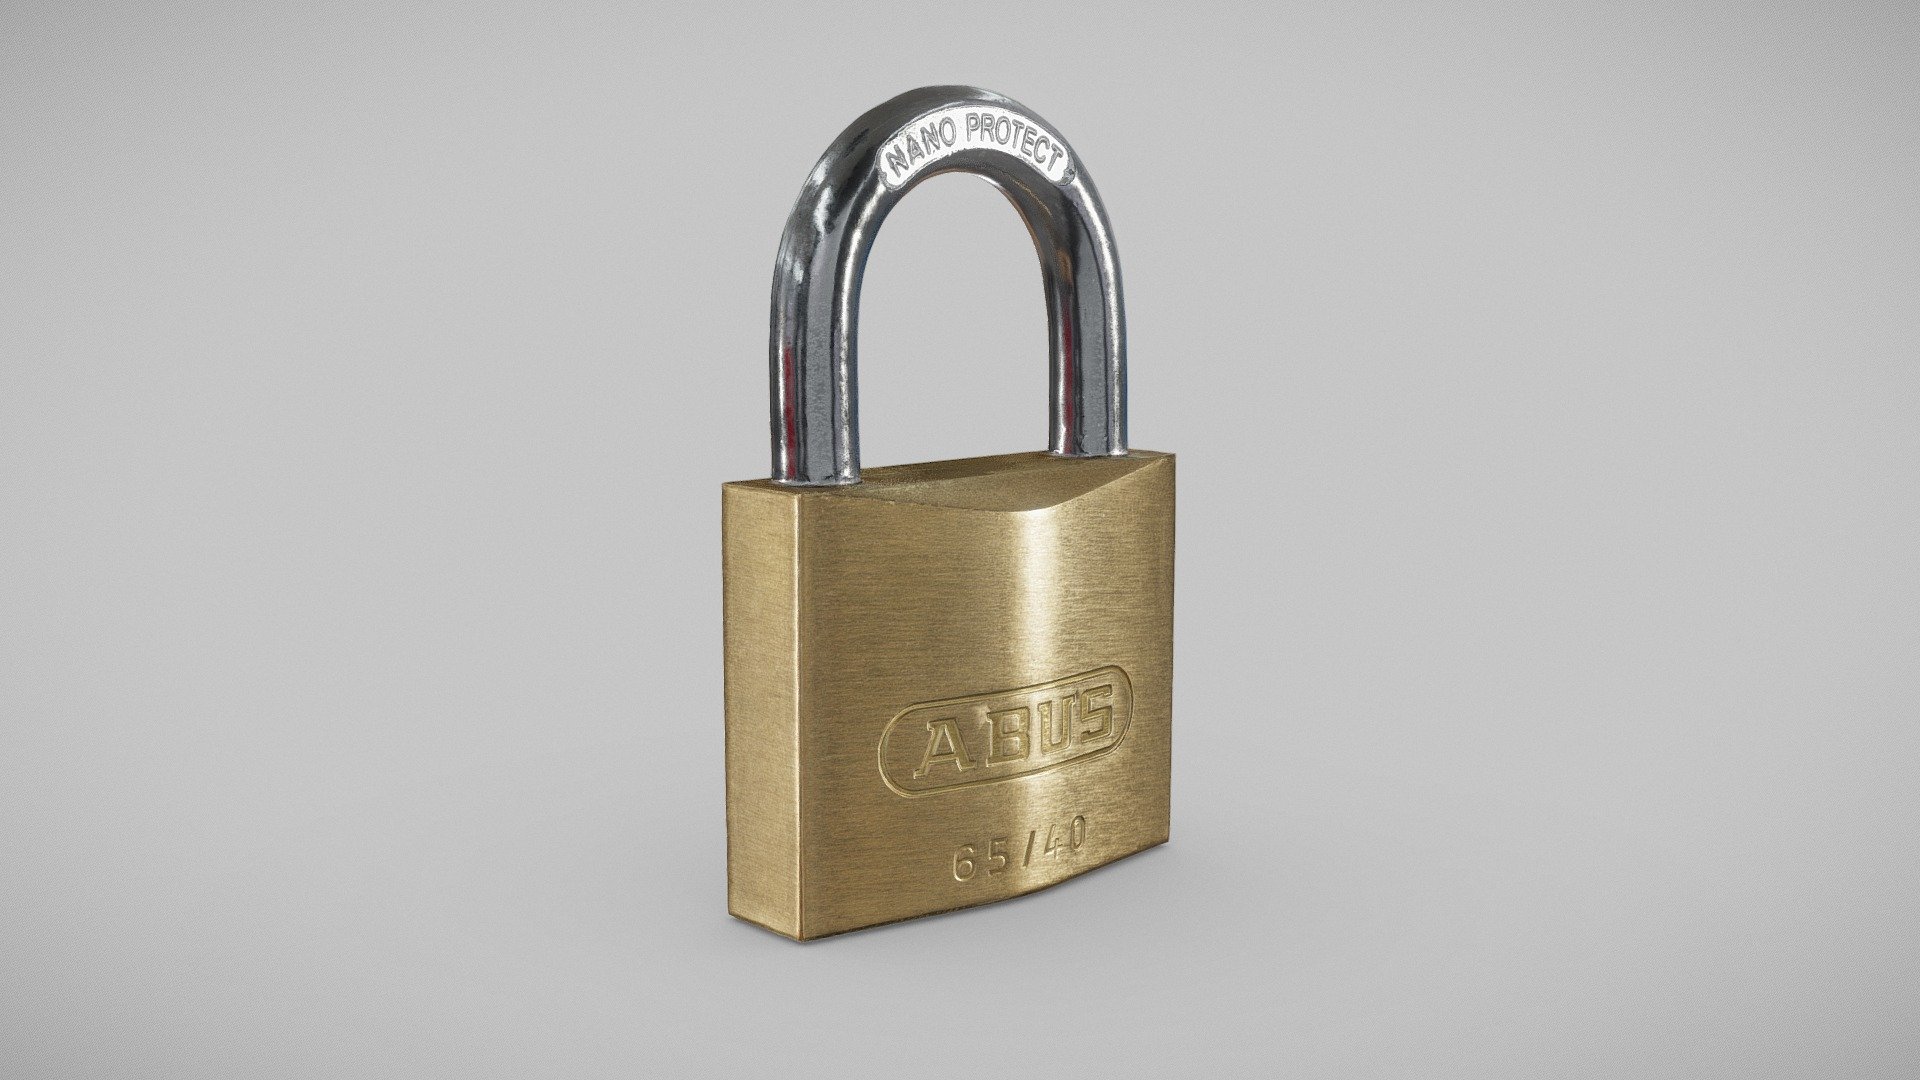 Golden ABUS Nano Protect Lock 

3.9 x 1.5 x 6.1 cm (22 micrometers per texel @ 4k)

Scanned using advanced technology developed by inciprocal Inc. that enables highly photo-realistic reproduction of real-world products in virtual environments. Our hardware and software technology combines advanced photometry, structured light, photogrammtery and light fields to capture and generate accurate material representations from tens of thousands of images targeting real-time and offline path-traced PBR compatible renderers.

Zip file includes low-poly OBJ mesh (in meters) with a set of 4k PBR textures compressed with lossless JPEG (no chroma sub-sampling) 3d model